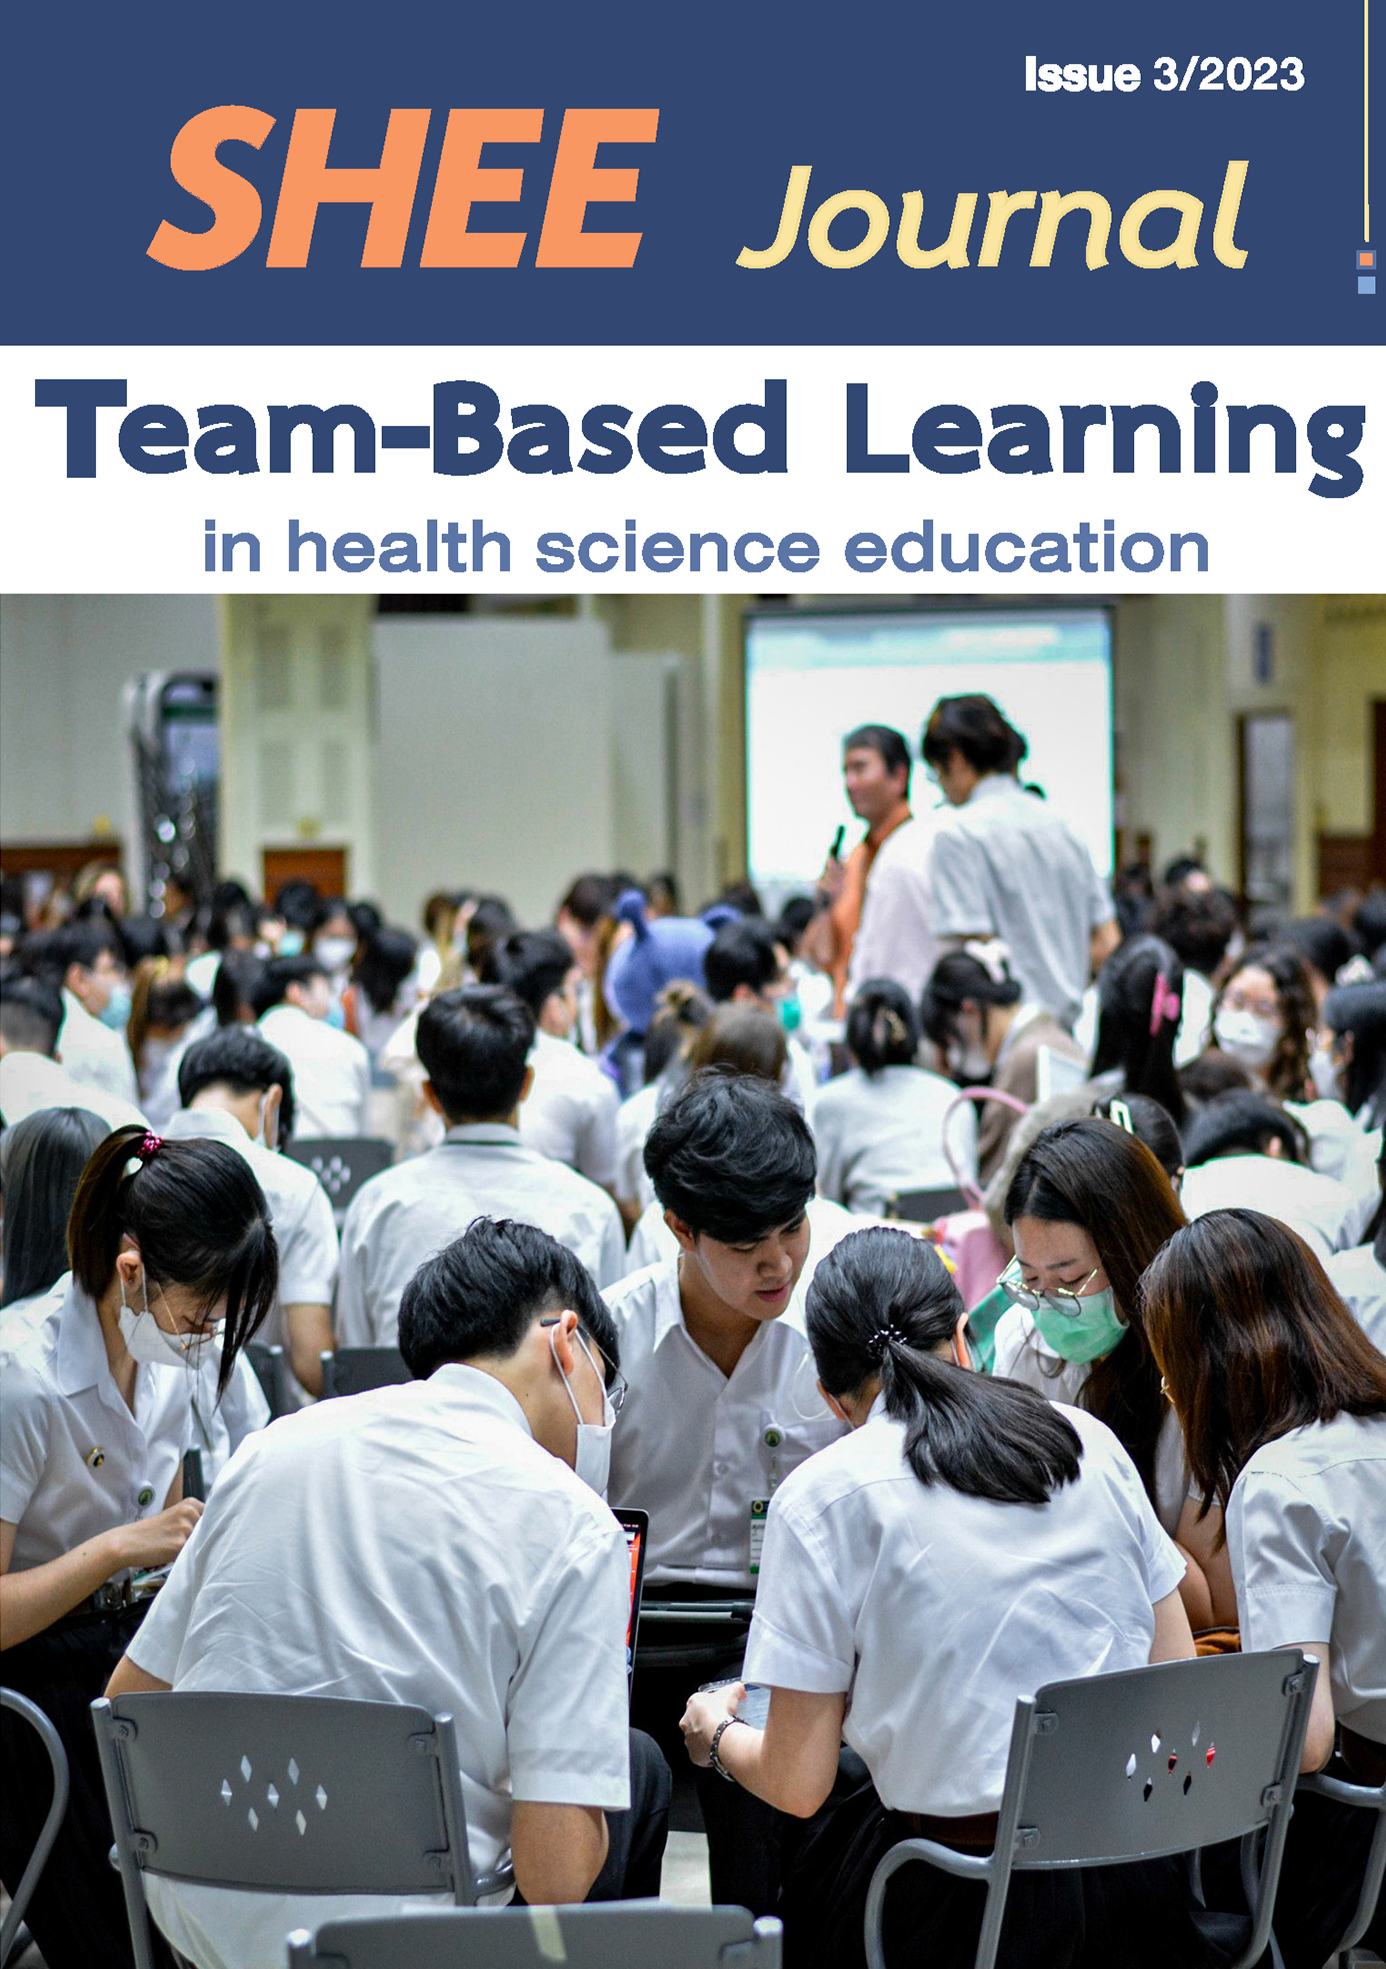 Journal Issue 3, 2023 Team-based Learning in Health Science Education